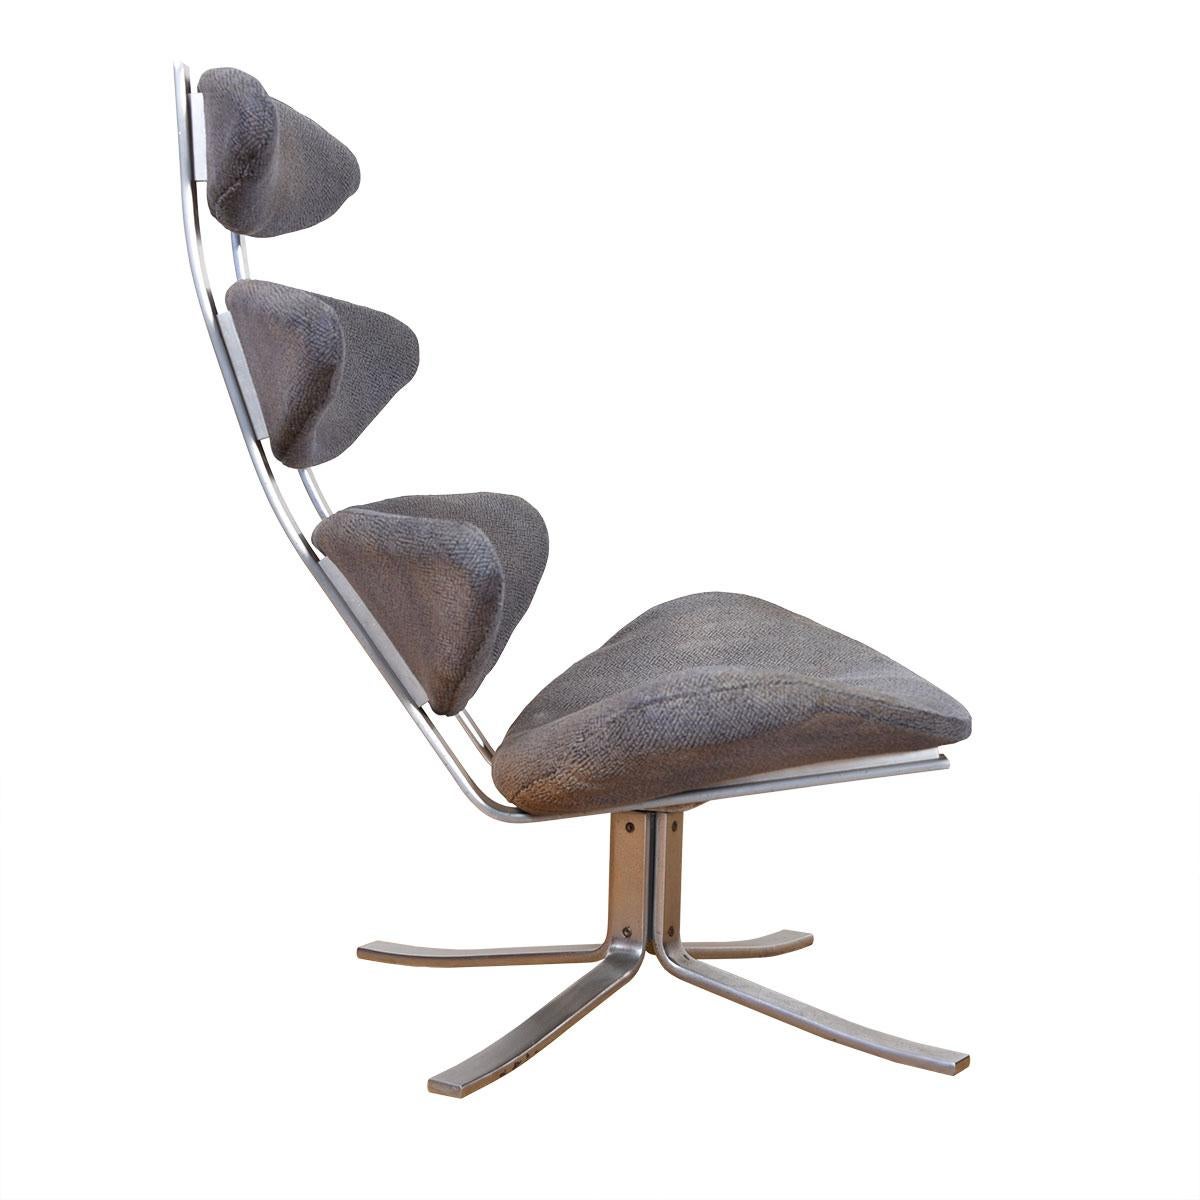 Mid-Century Modern Corona Chair by Poul Volther for Erik Jorgensen, 1964